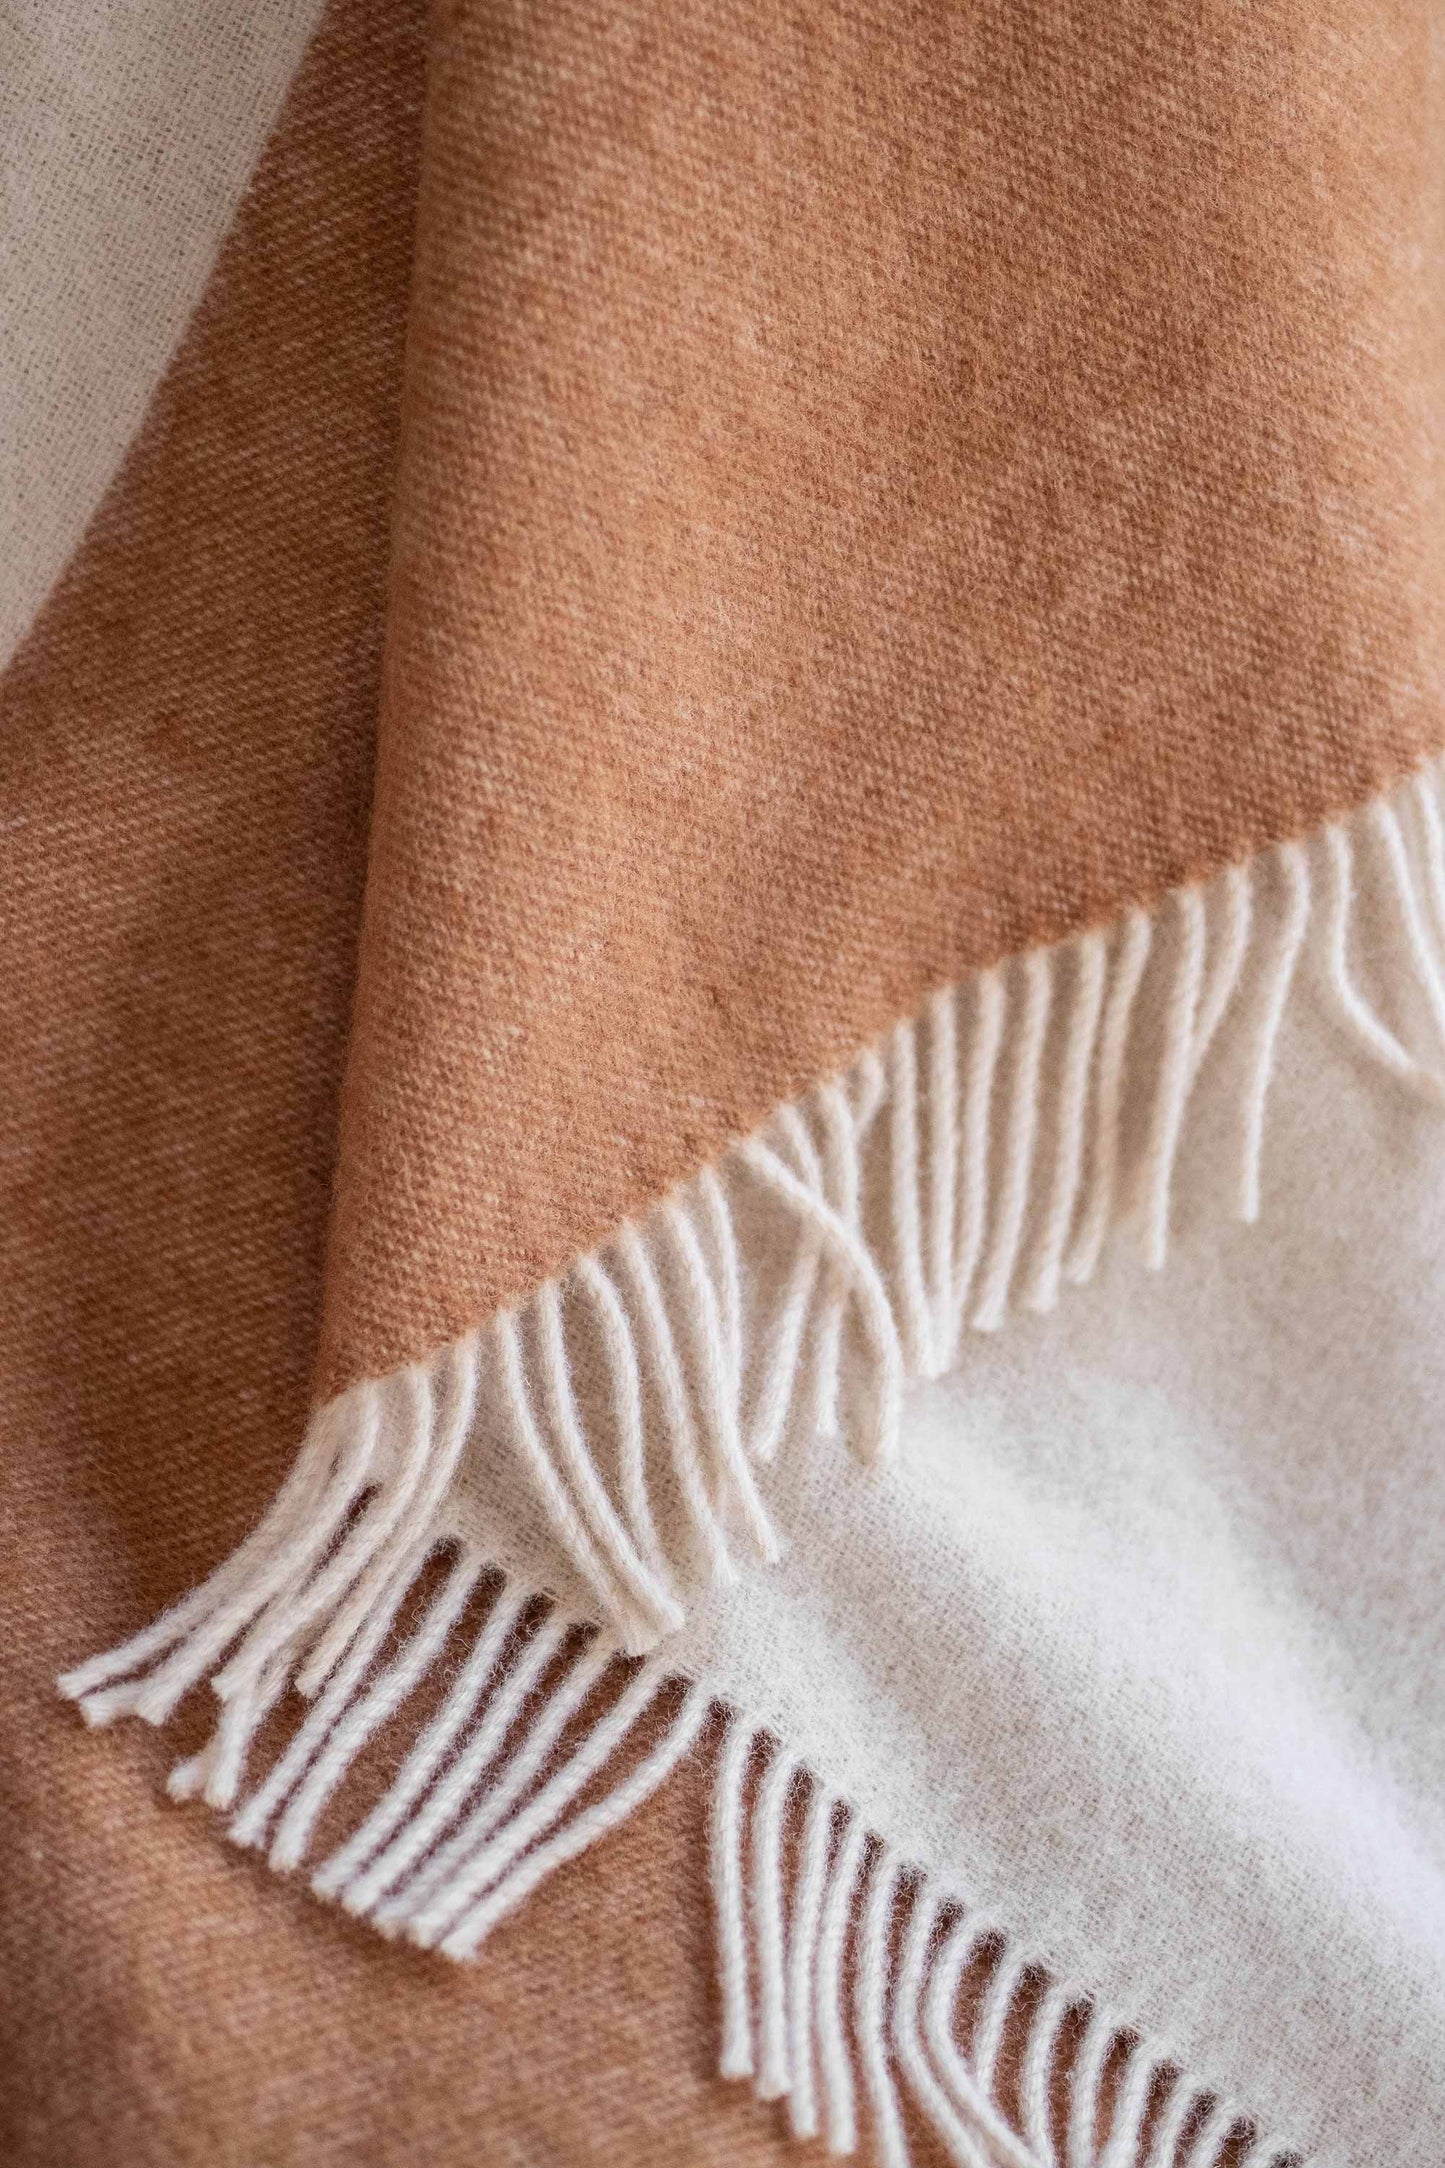 The River Grain Wool Blanket by Forestry Wool detail photo